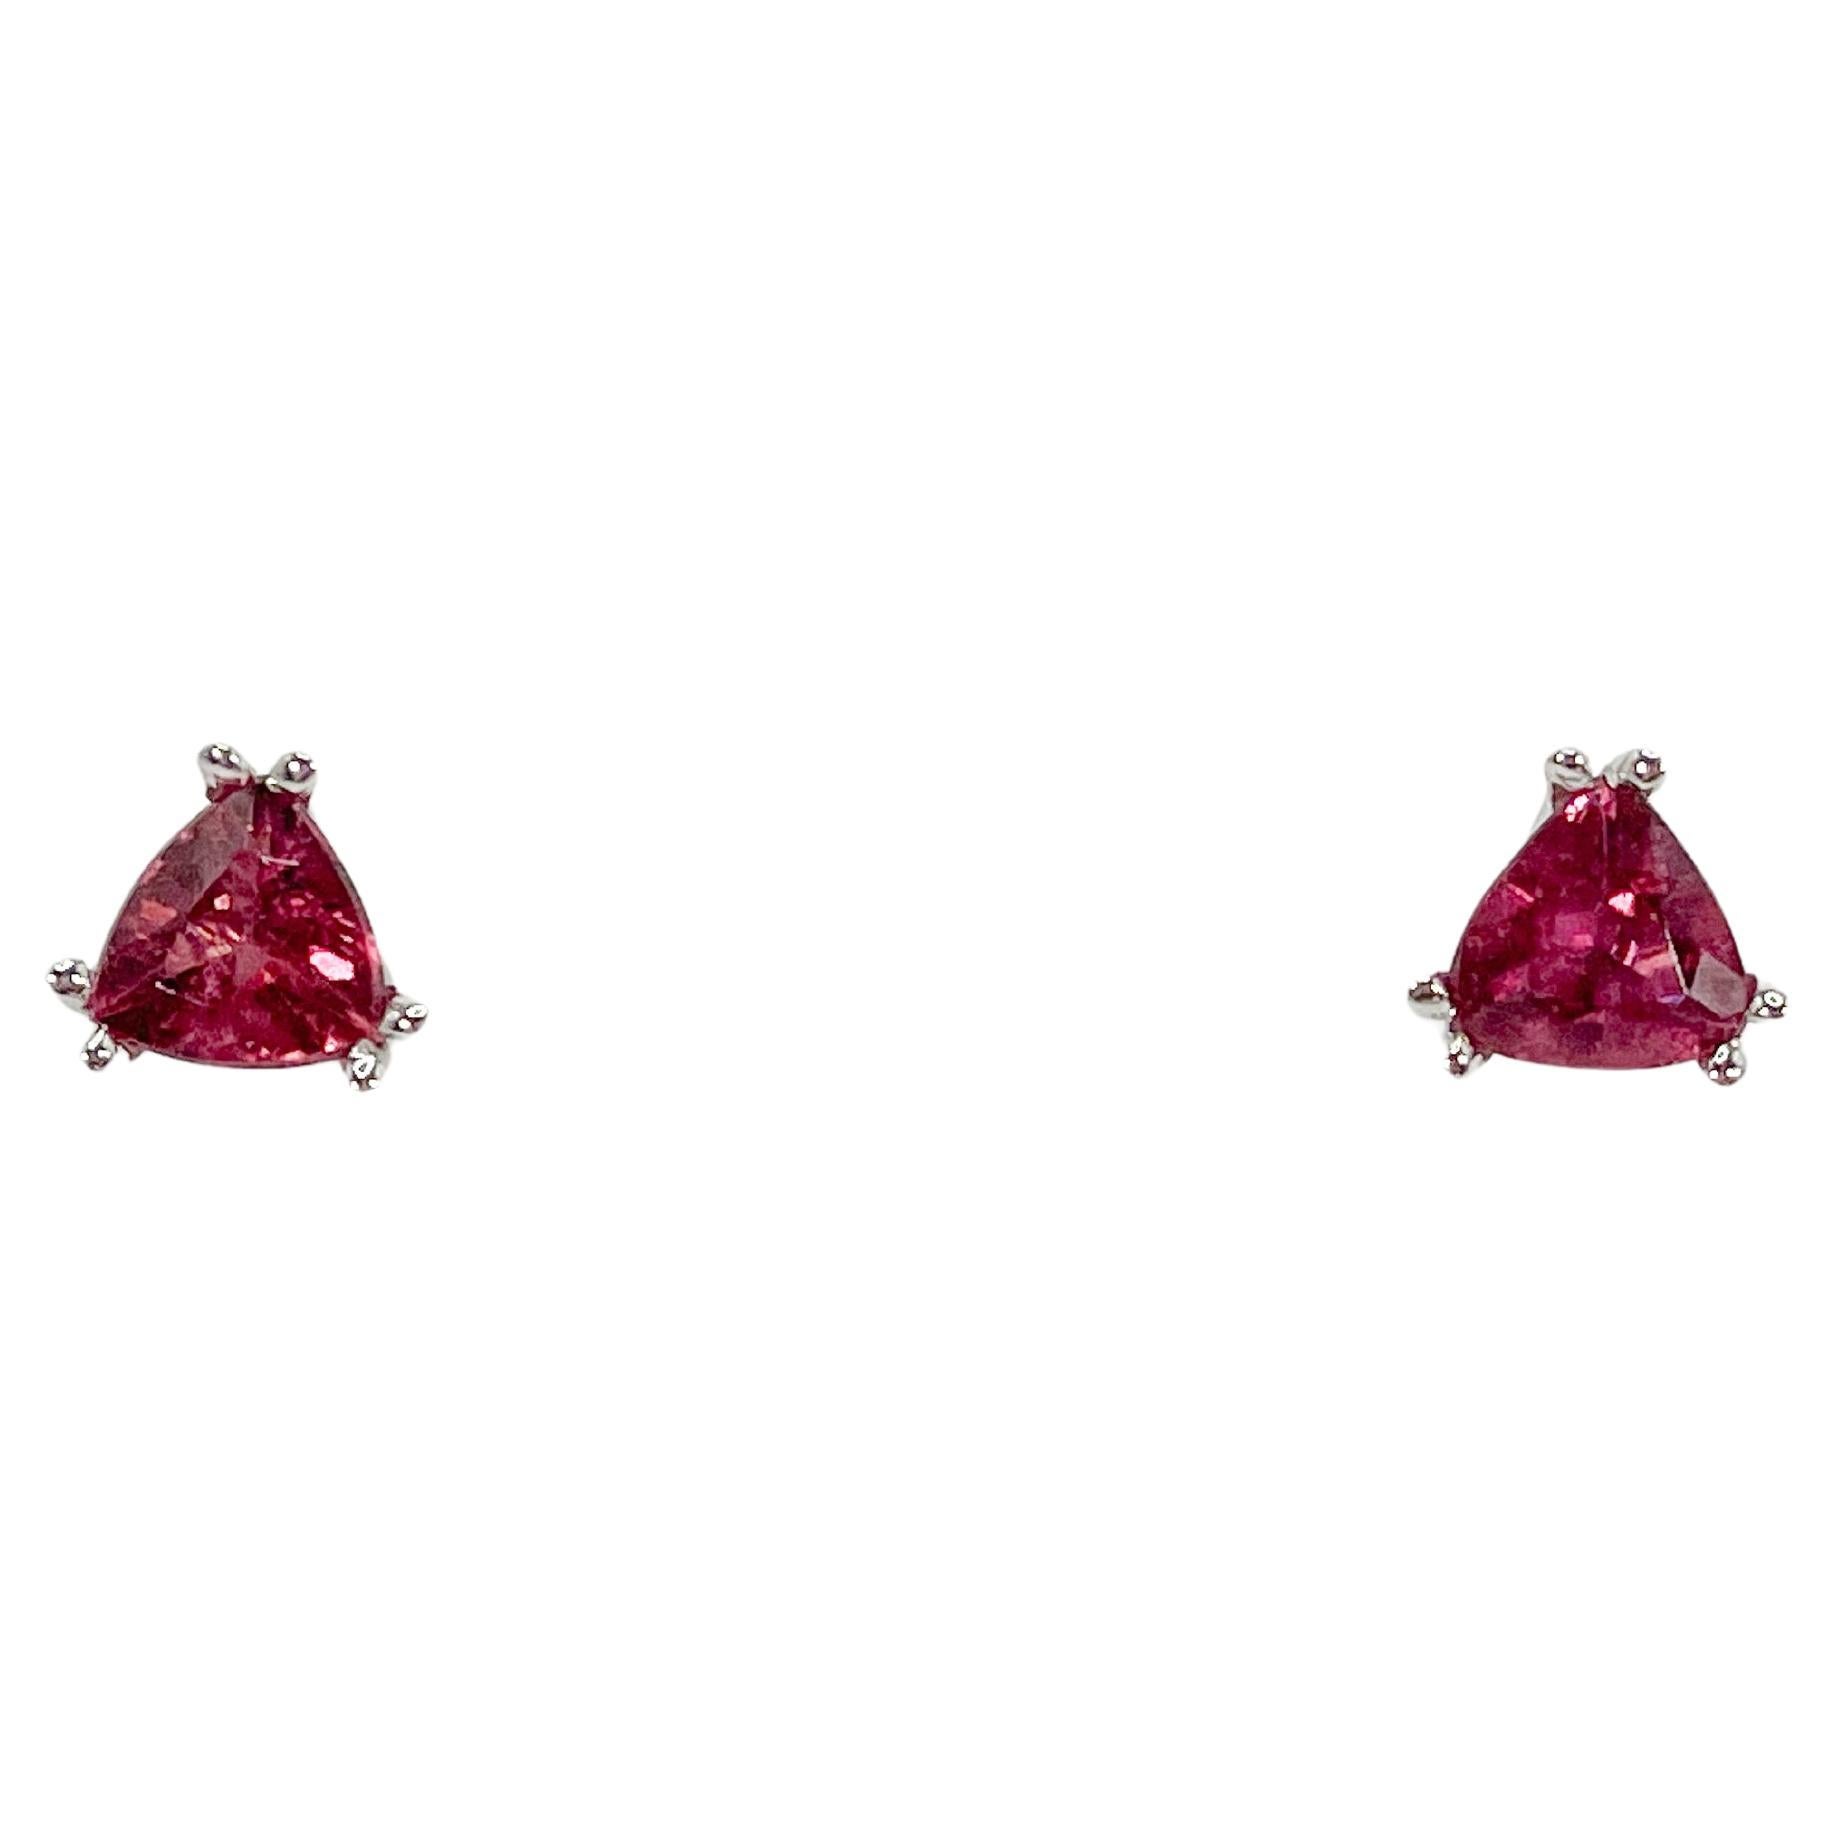 14K White Gold Trillion Pink Tourmaline Double Prong Stud Earrings 